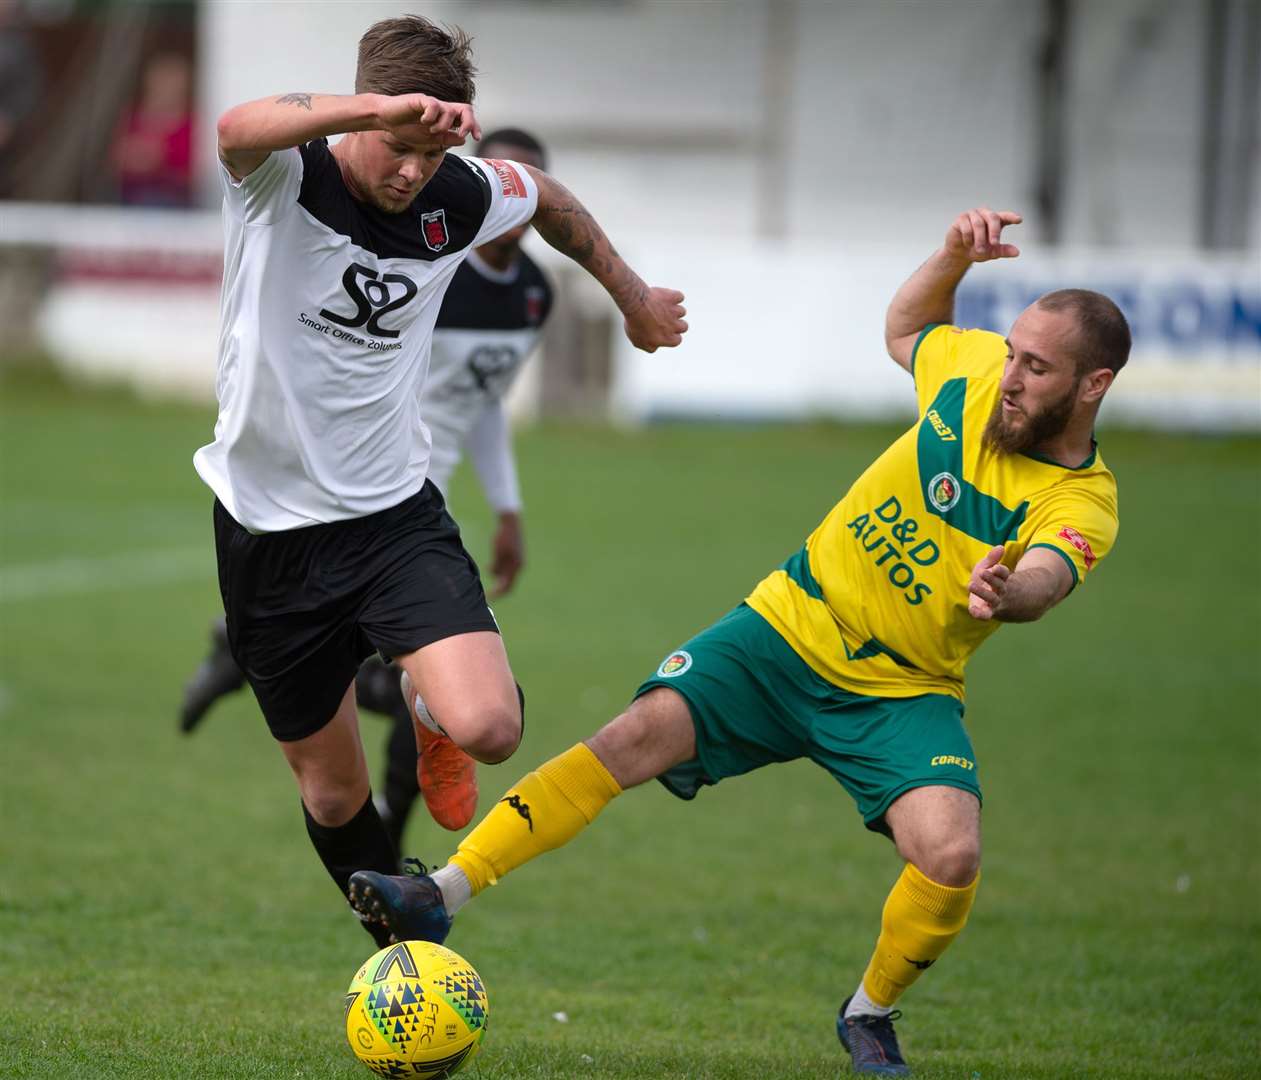 Clark Woodcock, left, has signed for Ashford after playing at Faversham. Picture: Ian Scammell